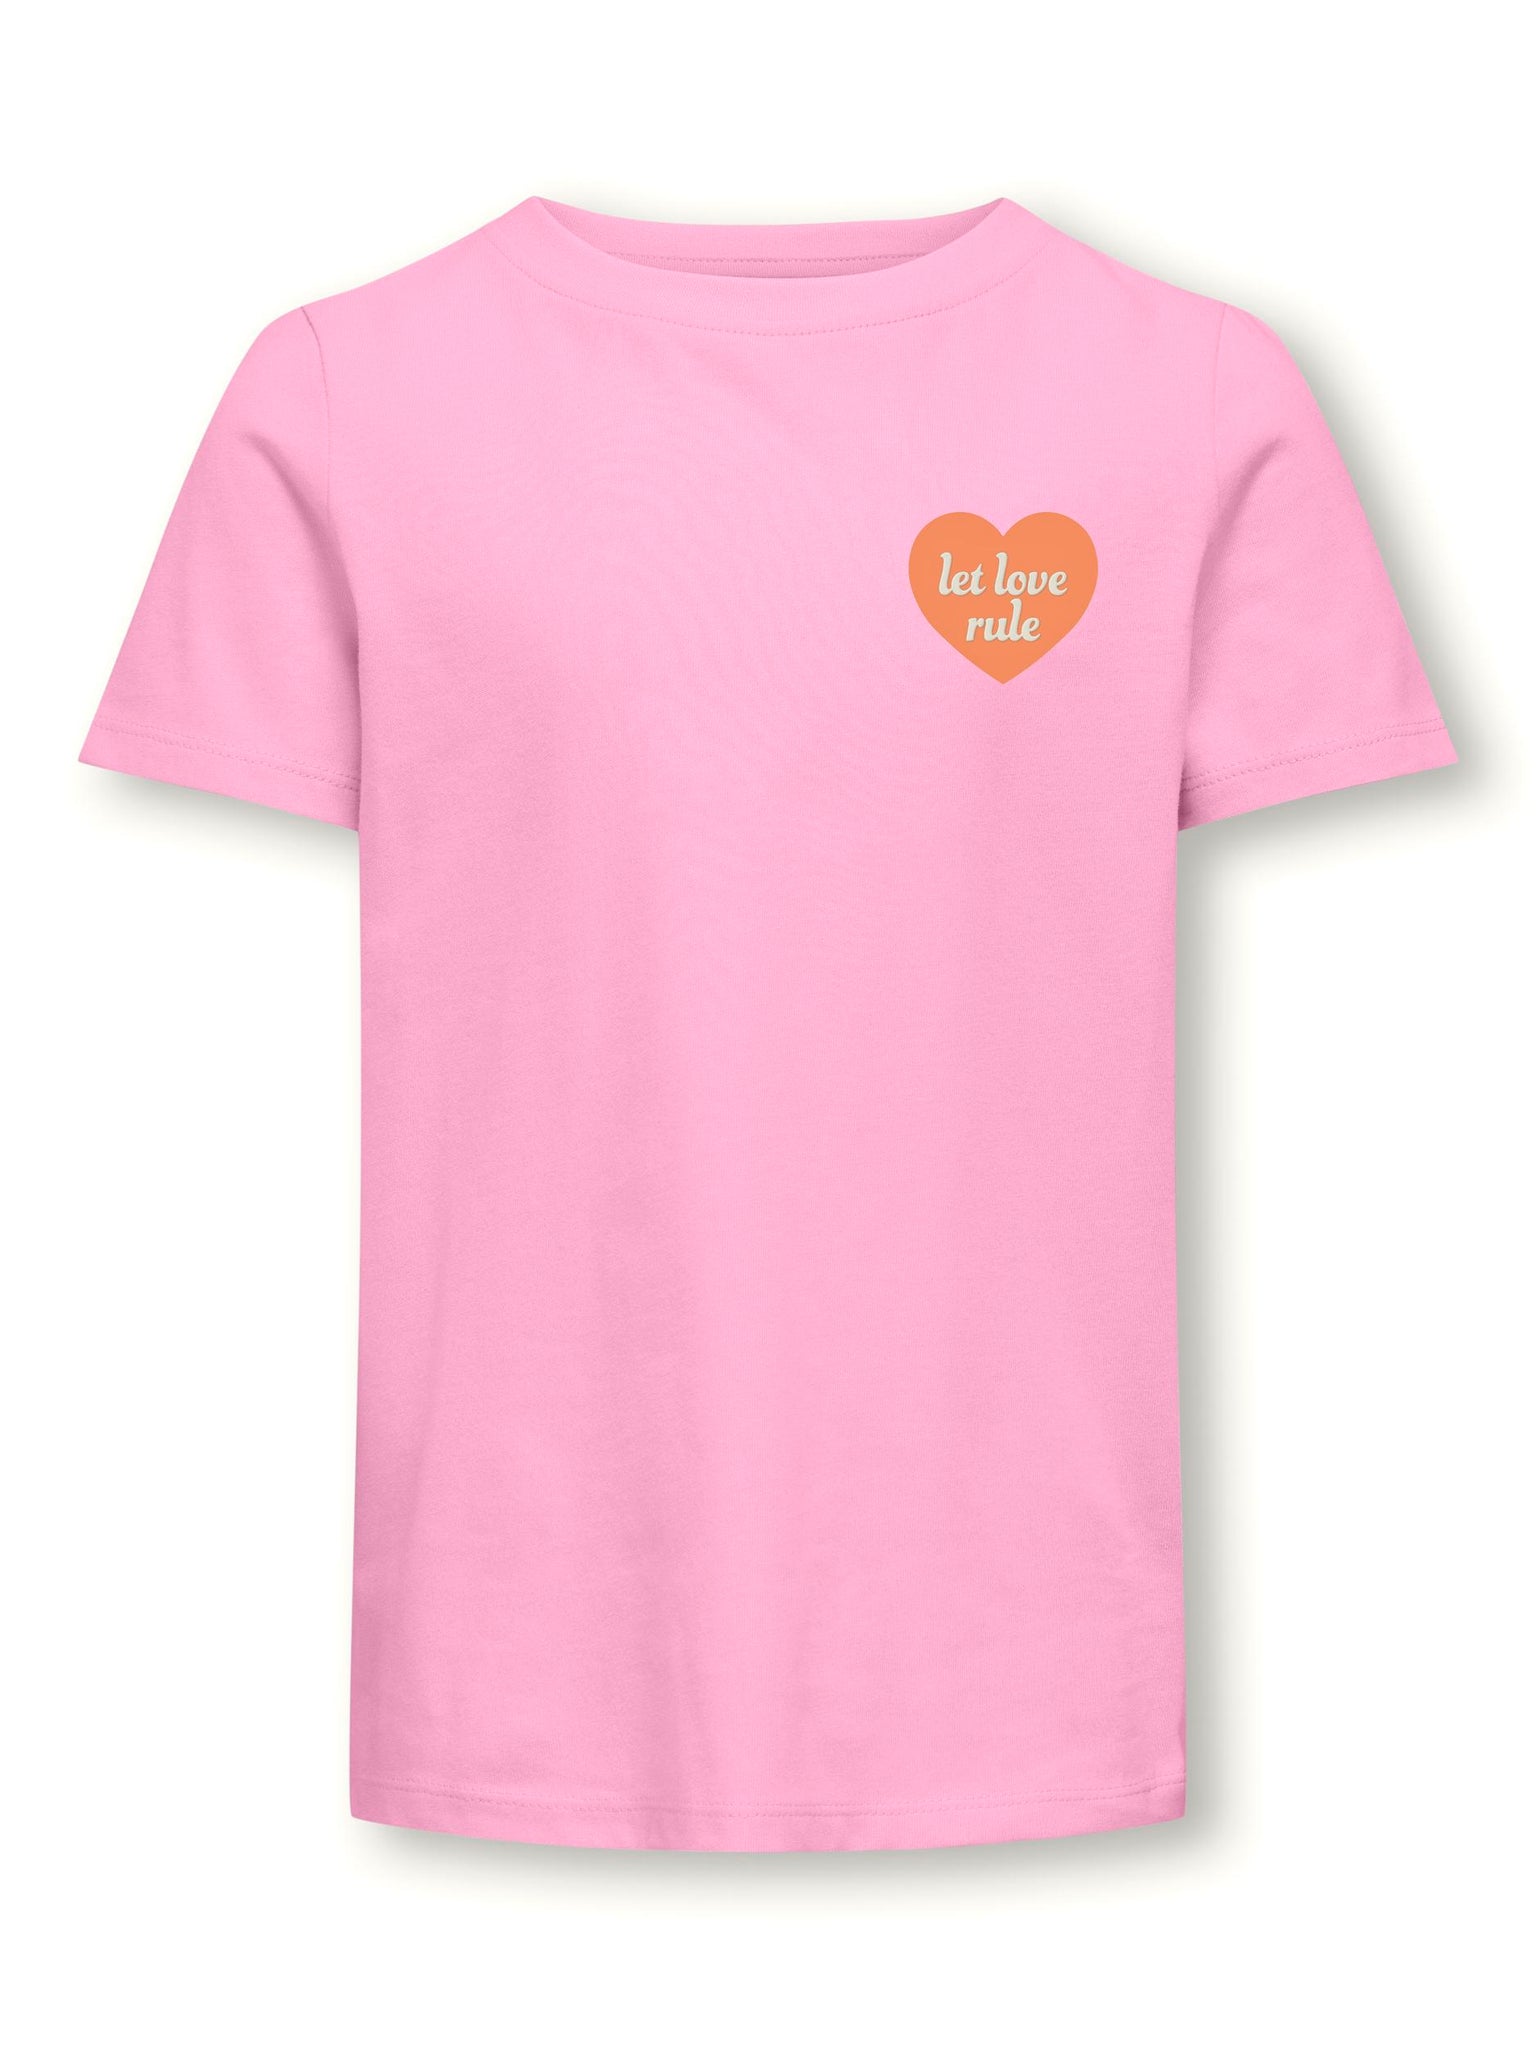 Kids Only "Let Love Rule" T-Shirt in Pink